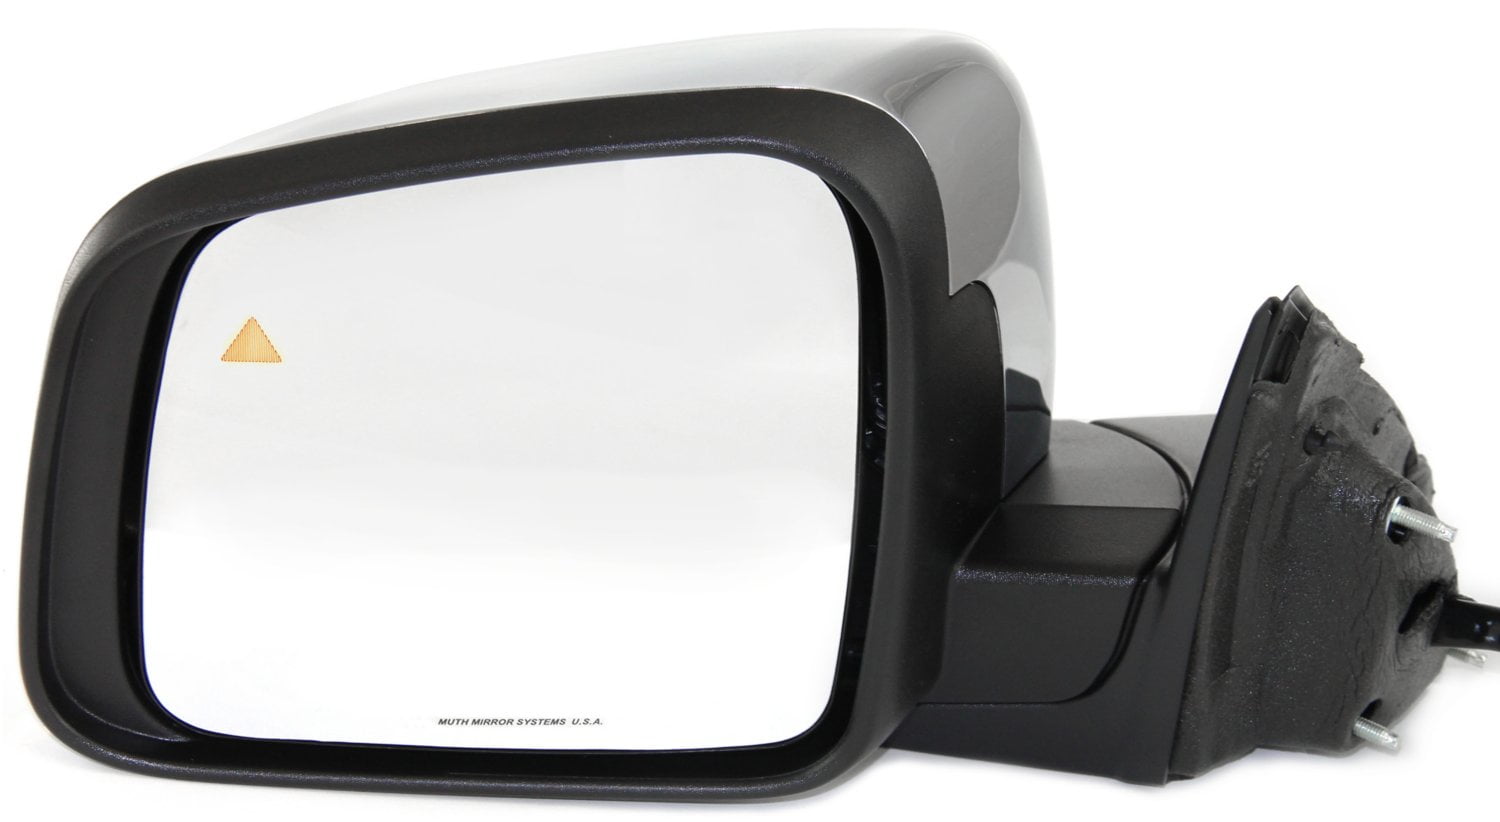 2014 JEEP GRAND CHEROKEE OEM DRIVERS SIDE HEATED AUTO DIMMING BLIND SPOT MIRROR